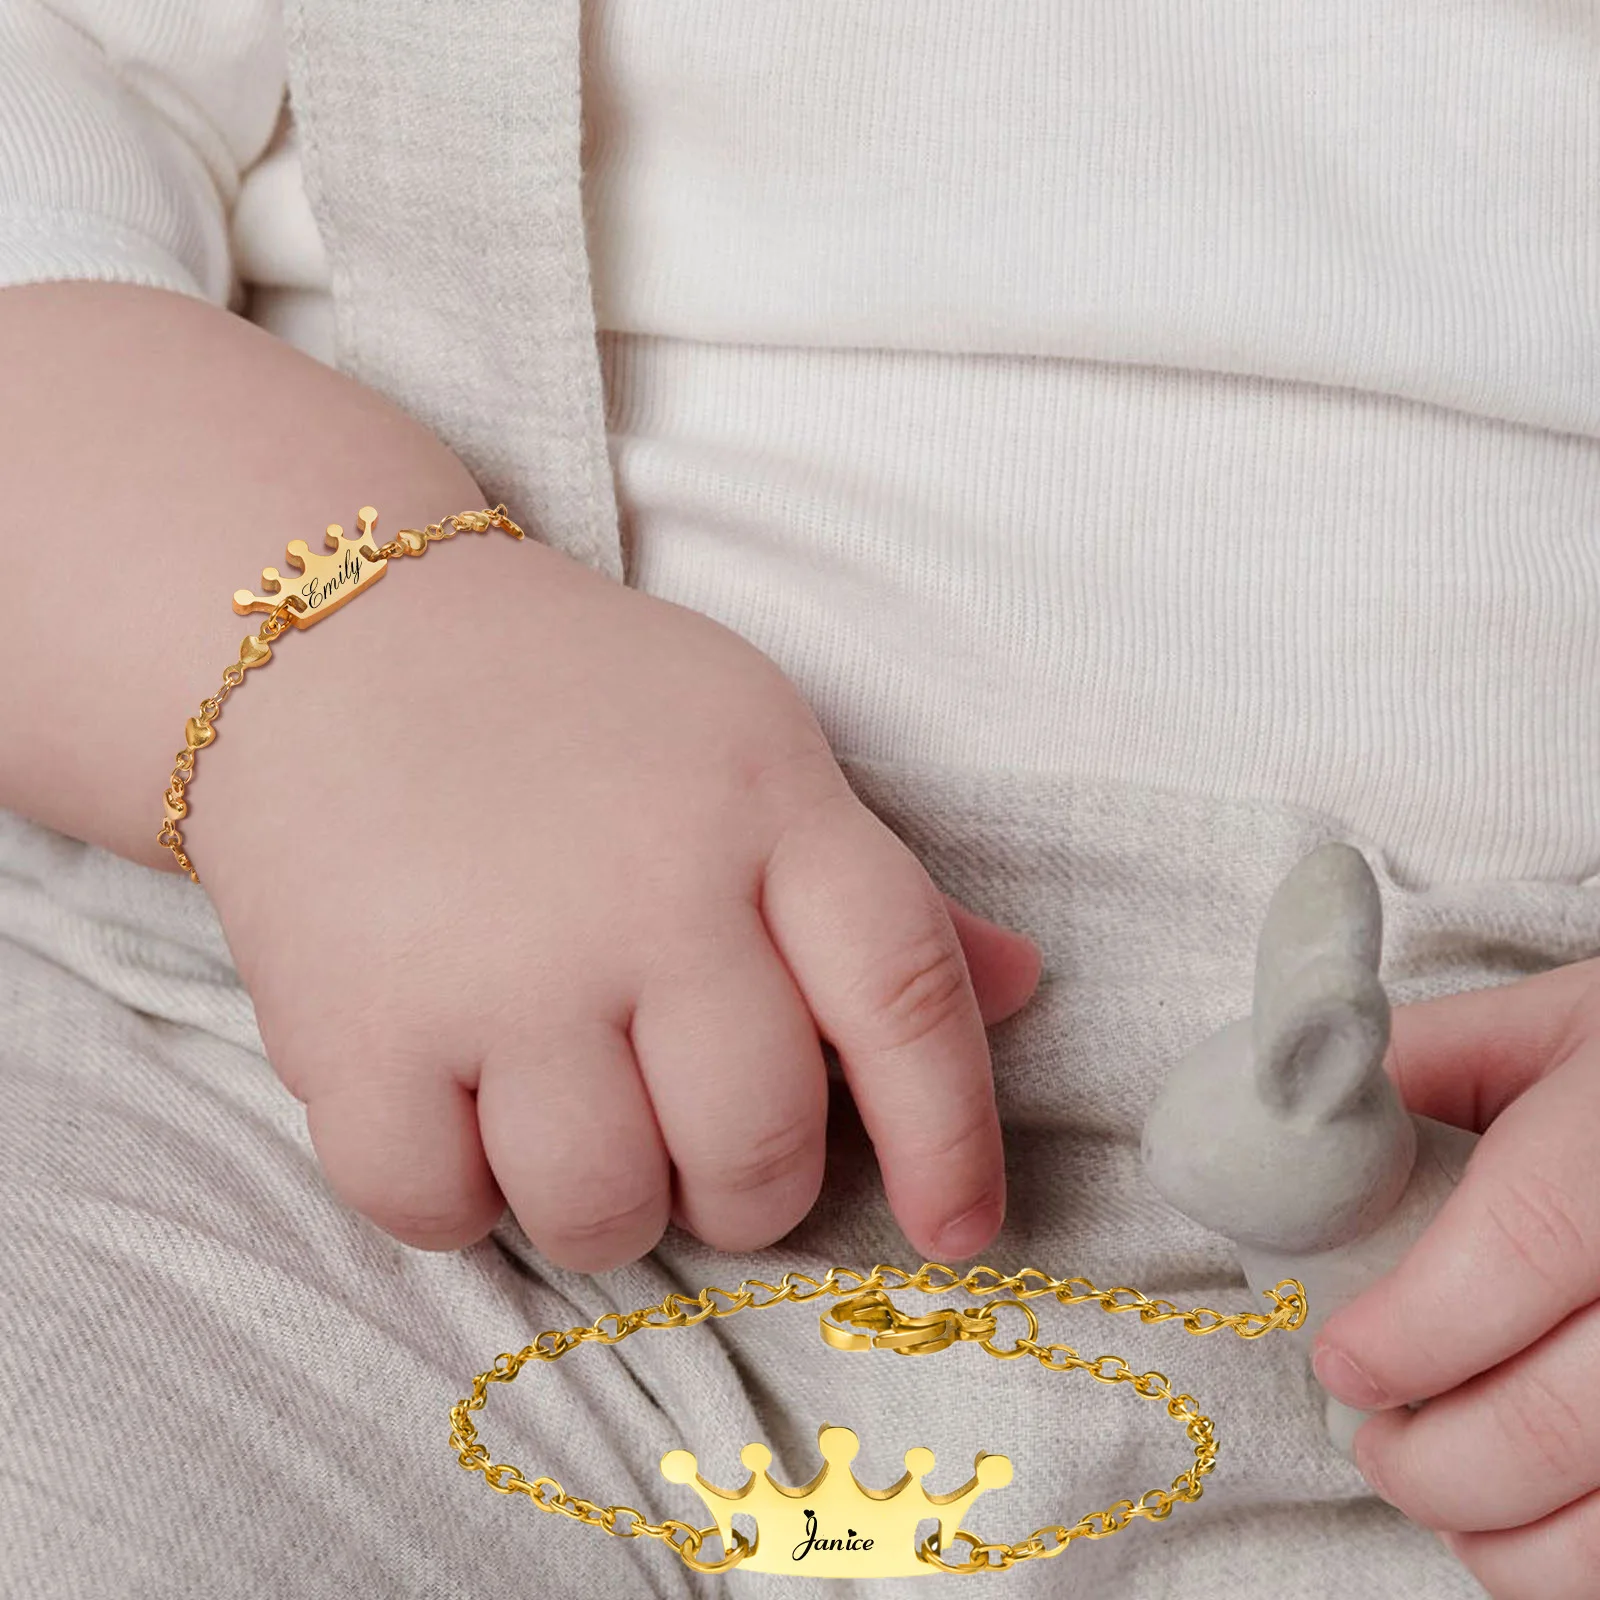 Personalized Name Crown Bracelet for Baby Children Kids, Customized ID Bangle, Stainless Steel Not Allergic Birthday Gift custom name bracelets for baby personalized name bracelet gold color stainless steel bangle customized children birth jewelry